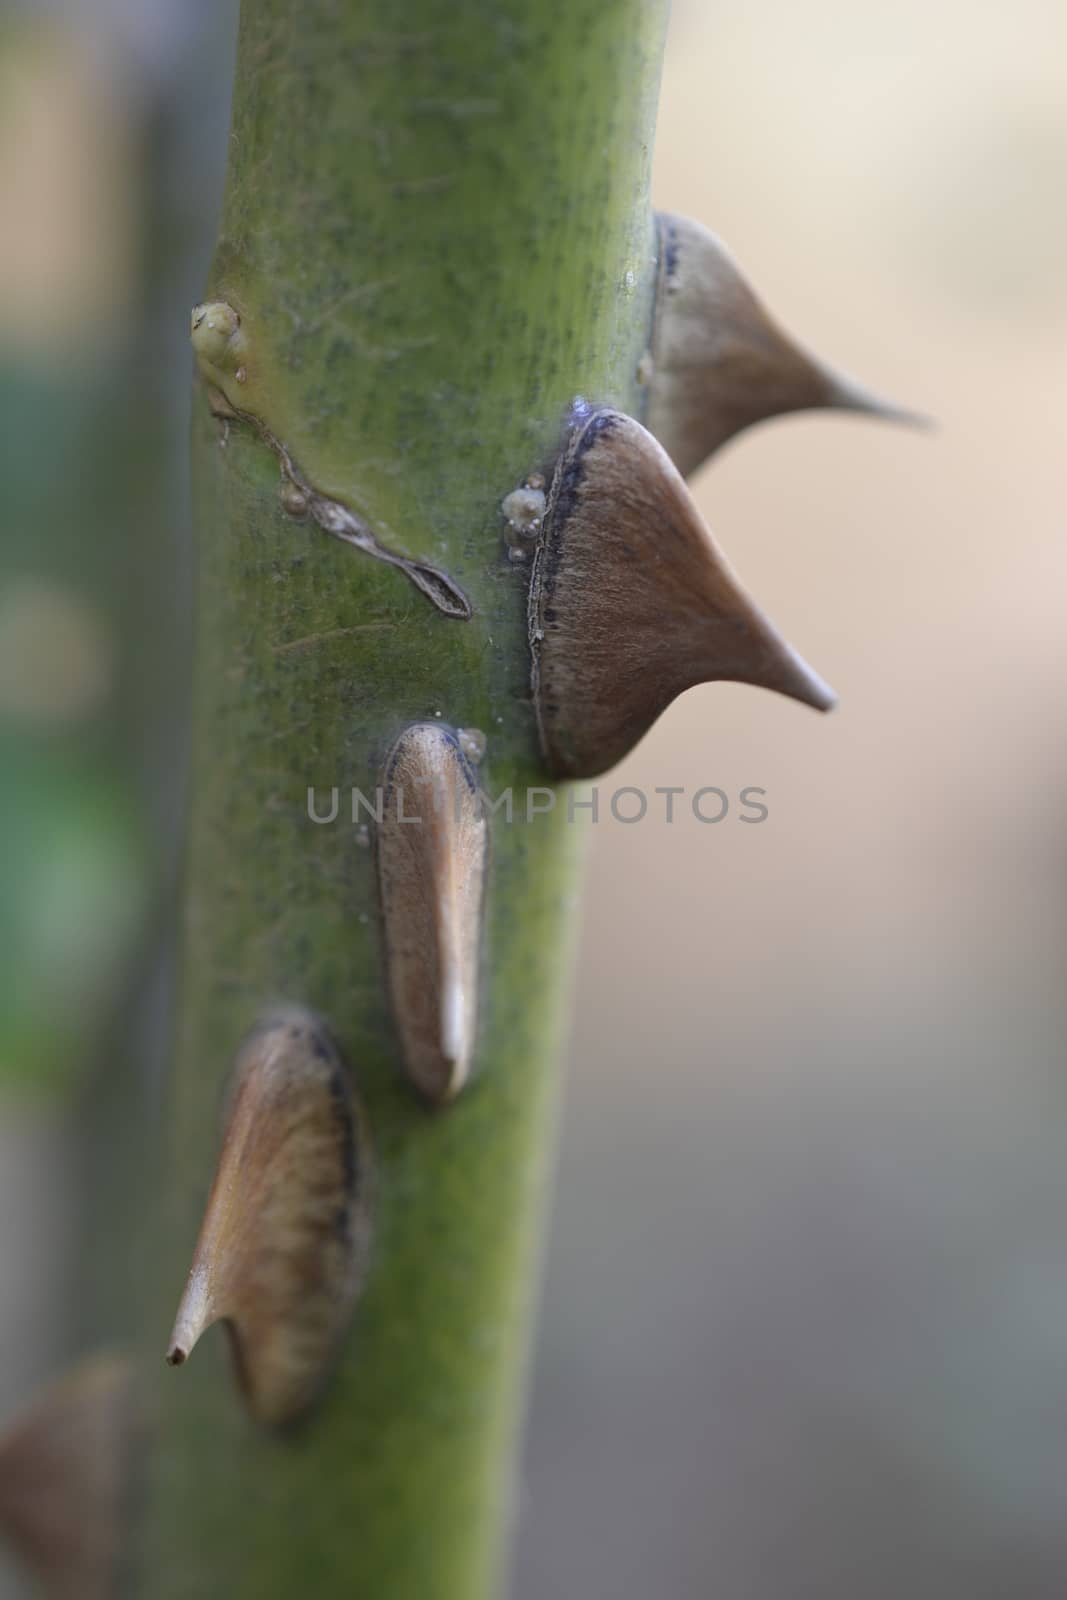 four rose thorns forming a stairway